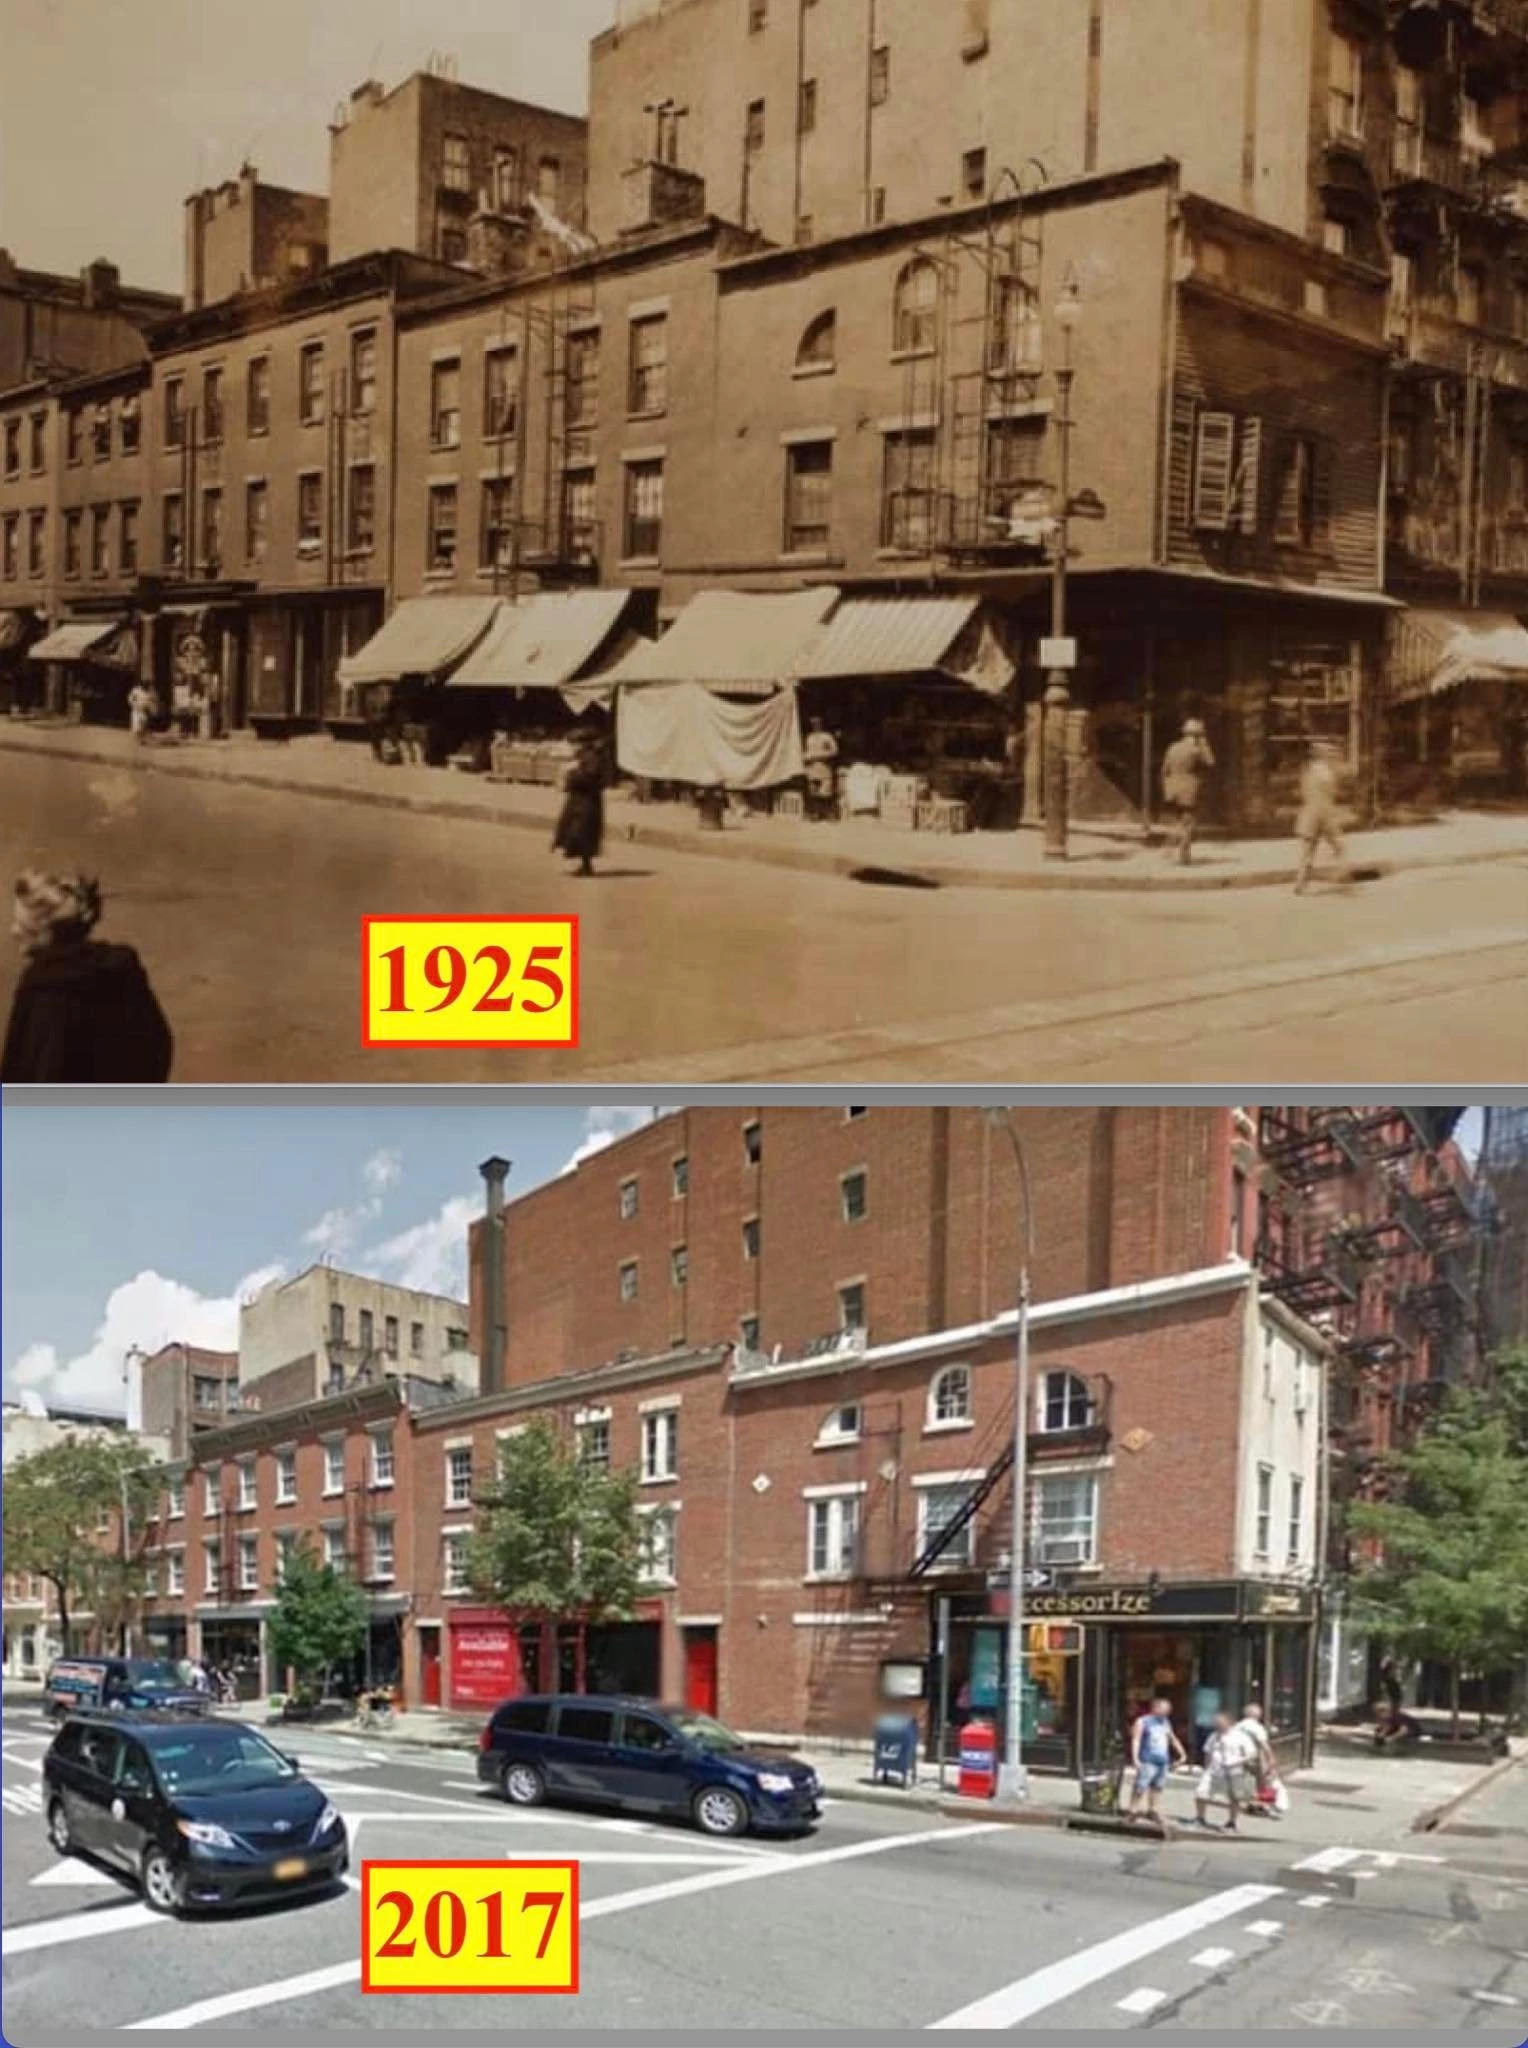 Bleeker and Christopher Streets, nearly a century apart, give or take a step or two.